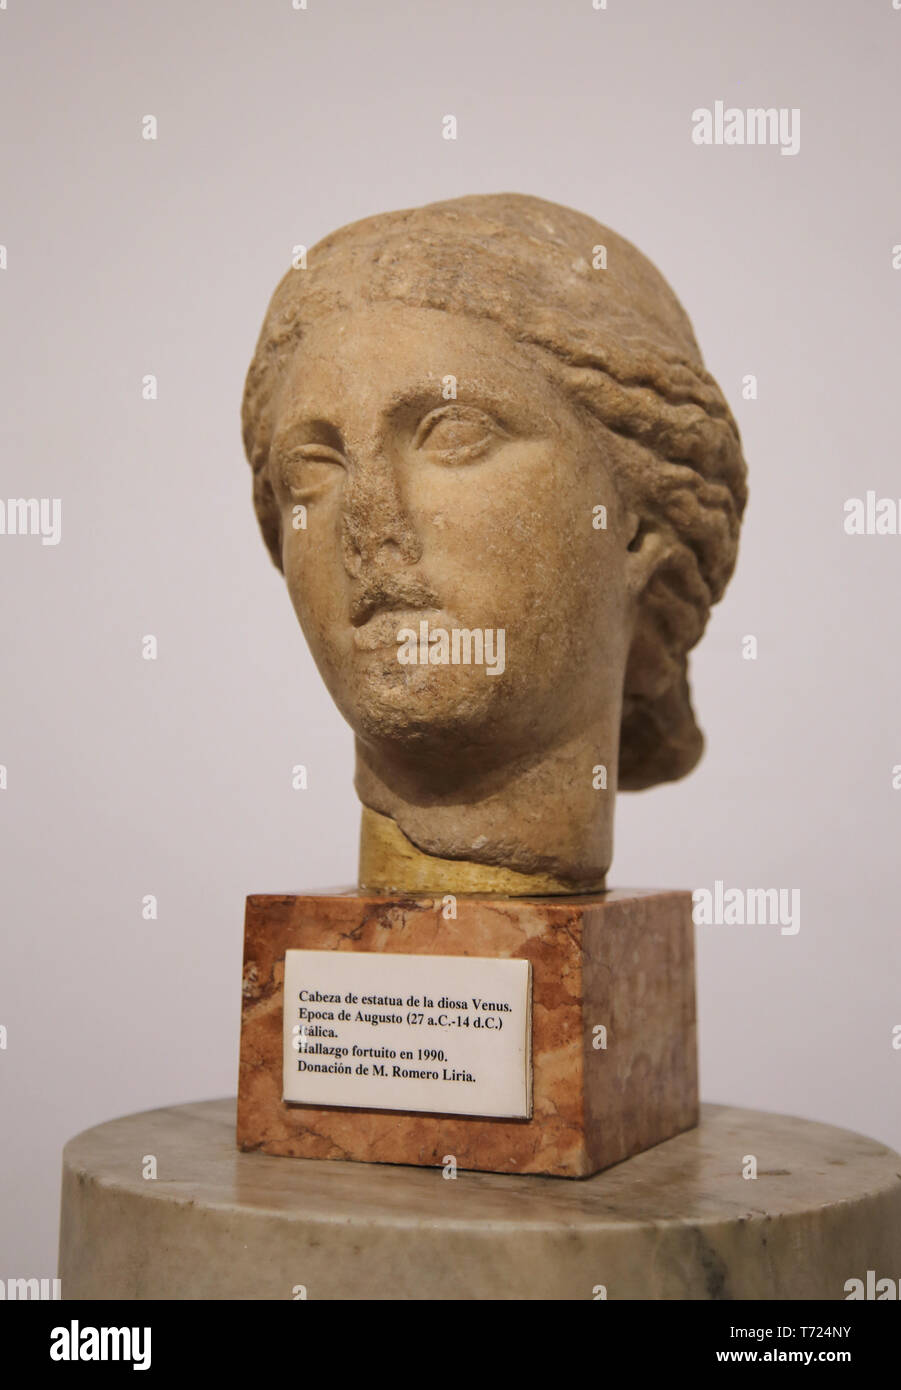 Head of the Venus. Augusta era(27 BC-14 AD). Italica, Andalusia, Spain. Archaeological Museum of Seville. Andalusia. Spain. Stock Photo